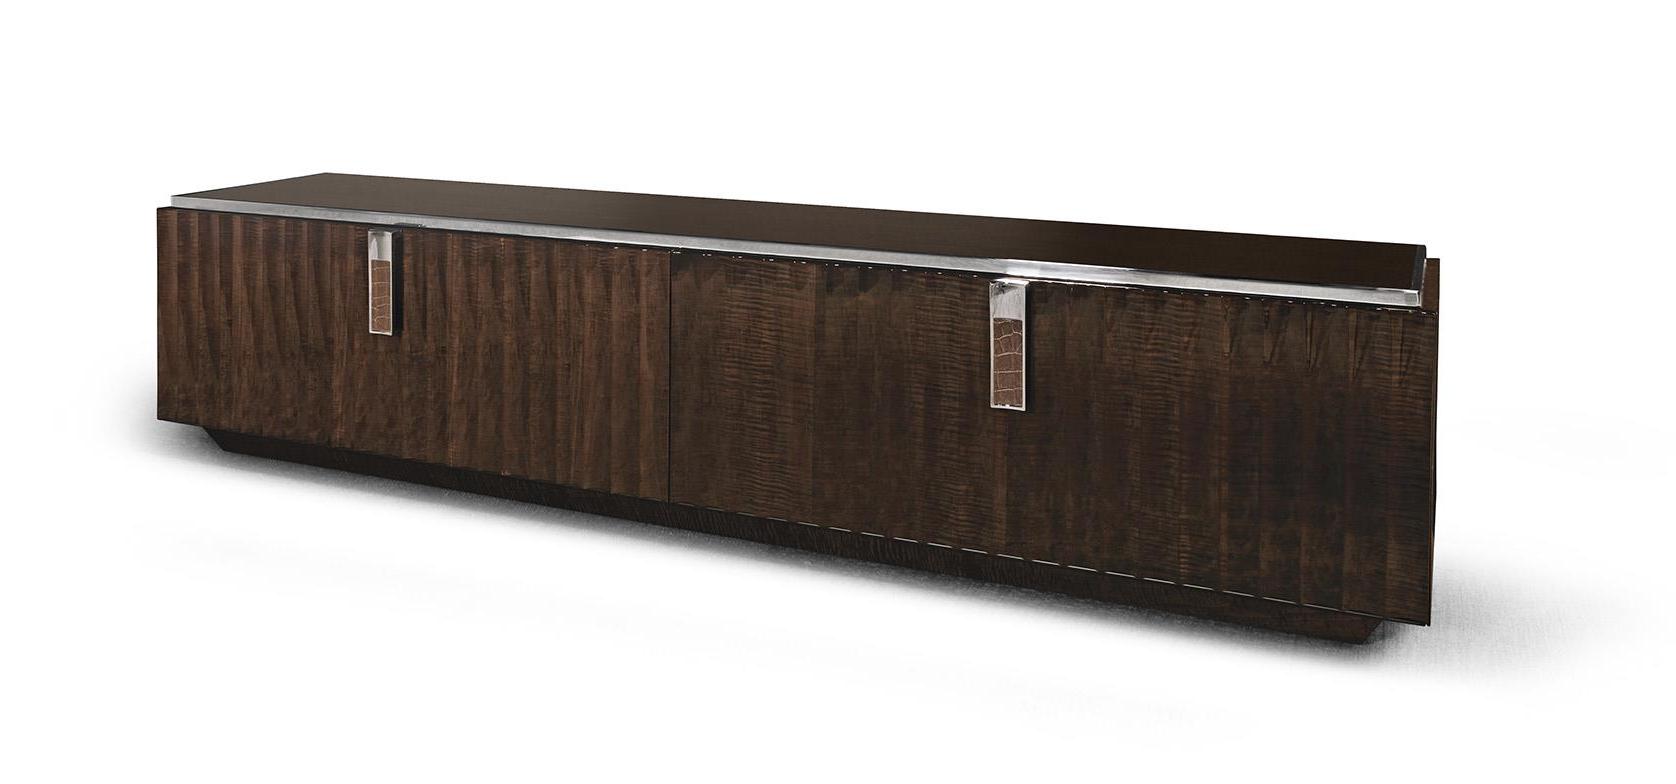 Luxury Wood TV Unit with Leather and Chrome Details